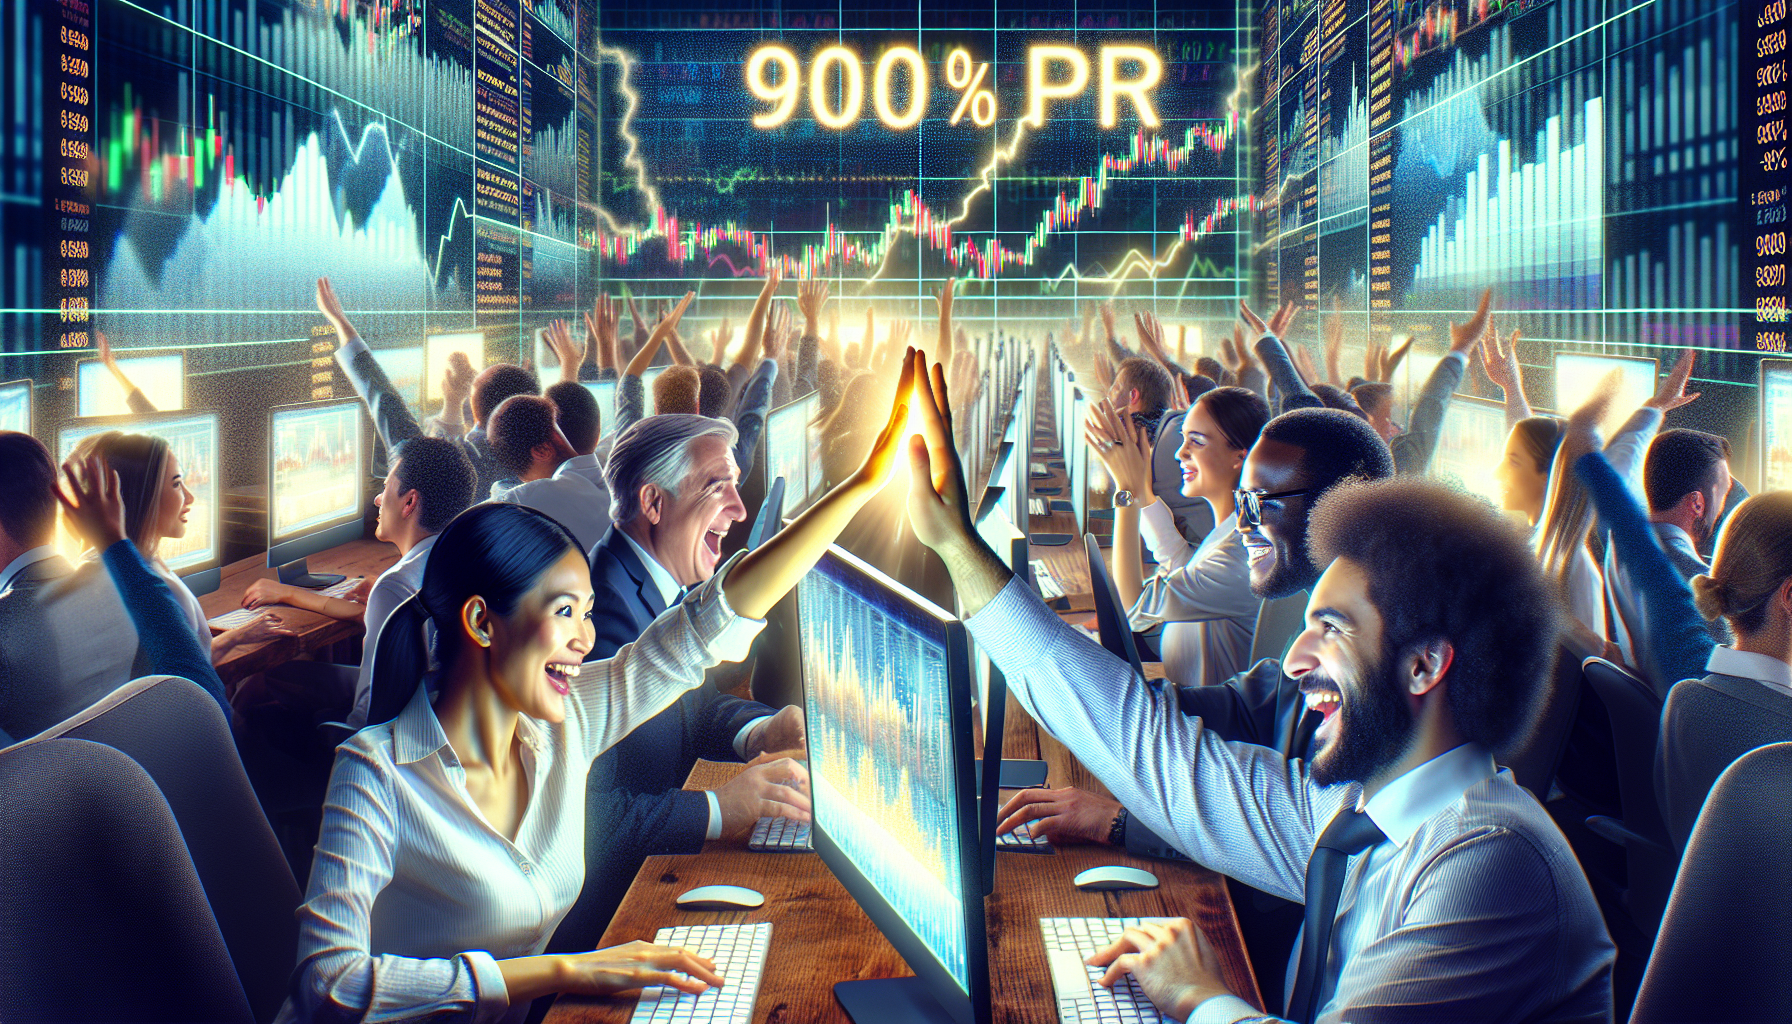 Crypto Traders Make 900% Profit from Network Glitch